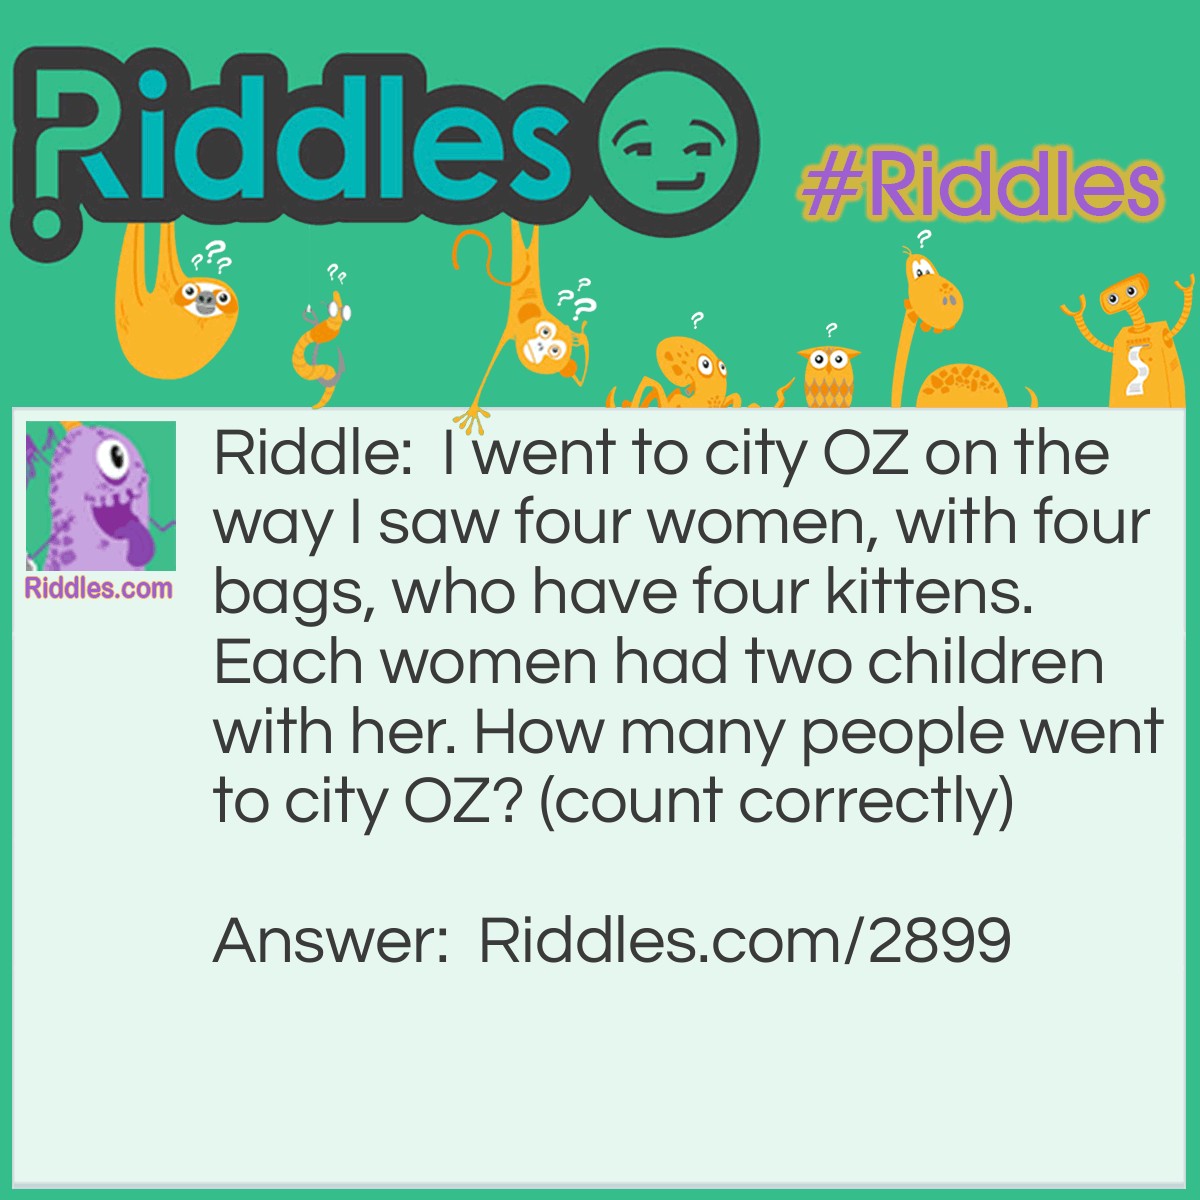 Riddle: I went to city OZ on the way I saw four women, with four bags, who have four kittens. Each woman had two children with her. How many people went to city OZ? (count correctly) Answer: One because I went to city OZ on the way I saw...